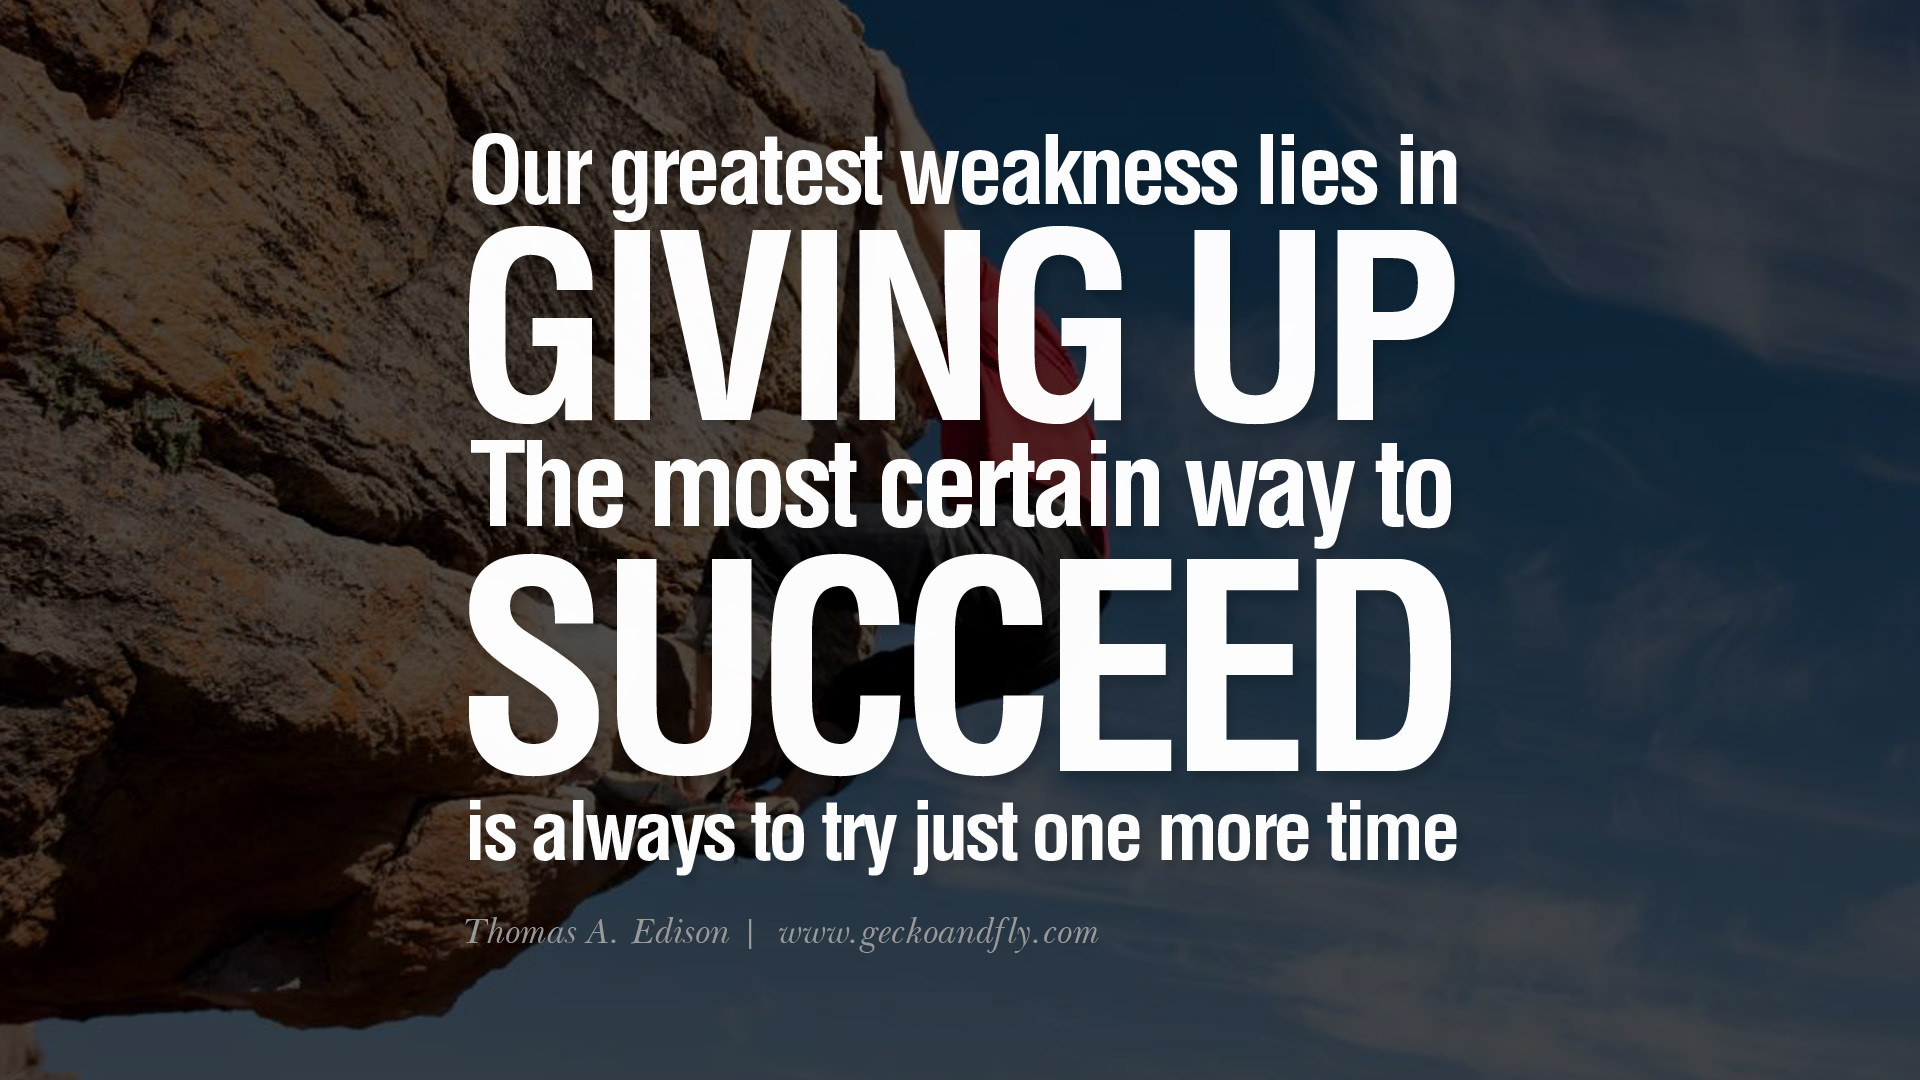 Sports Quotes Motivational
 Inspiring Sports Quotes Not Giving Up QuotesGram